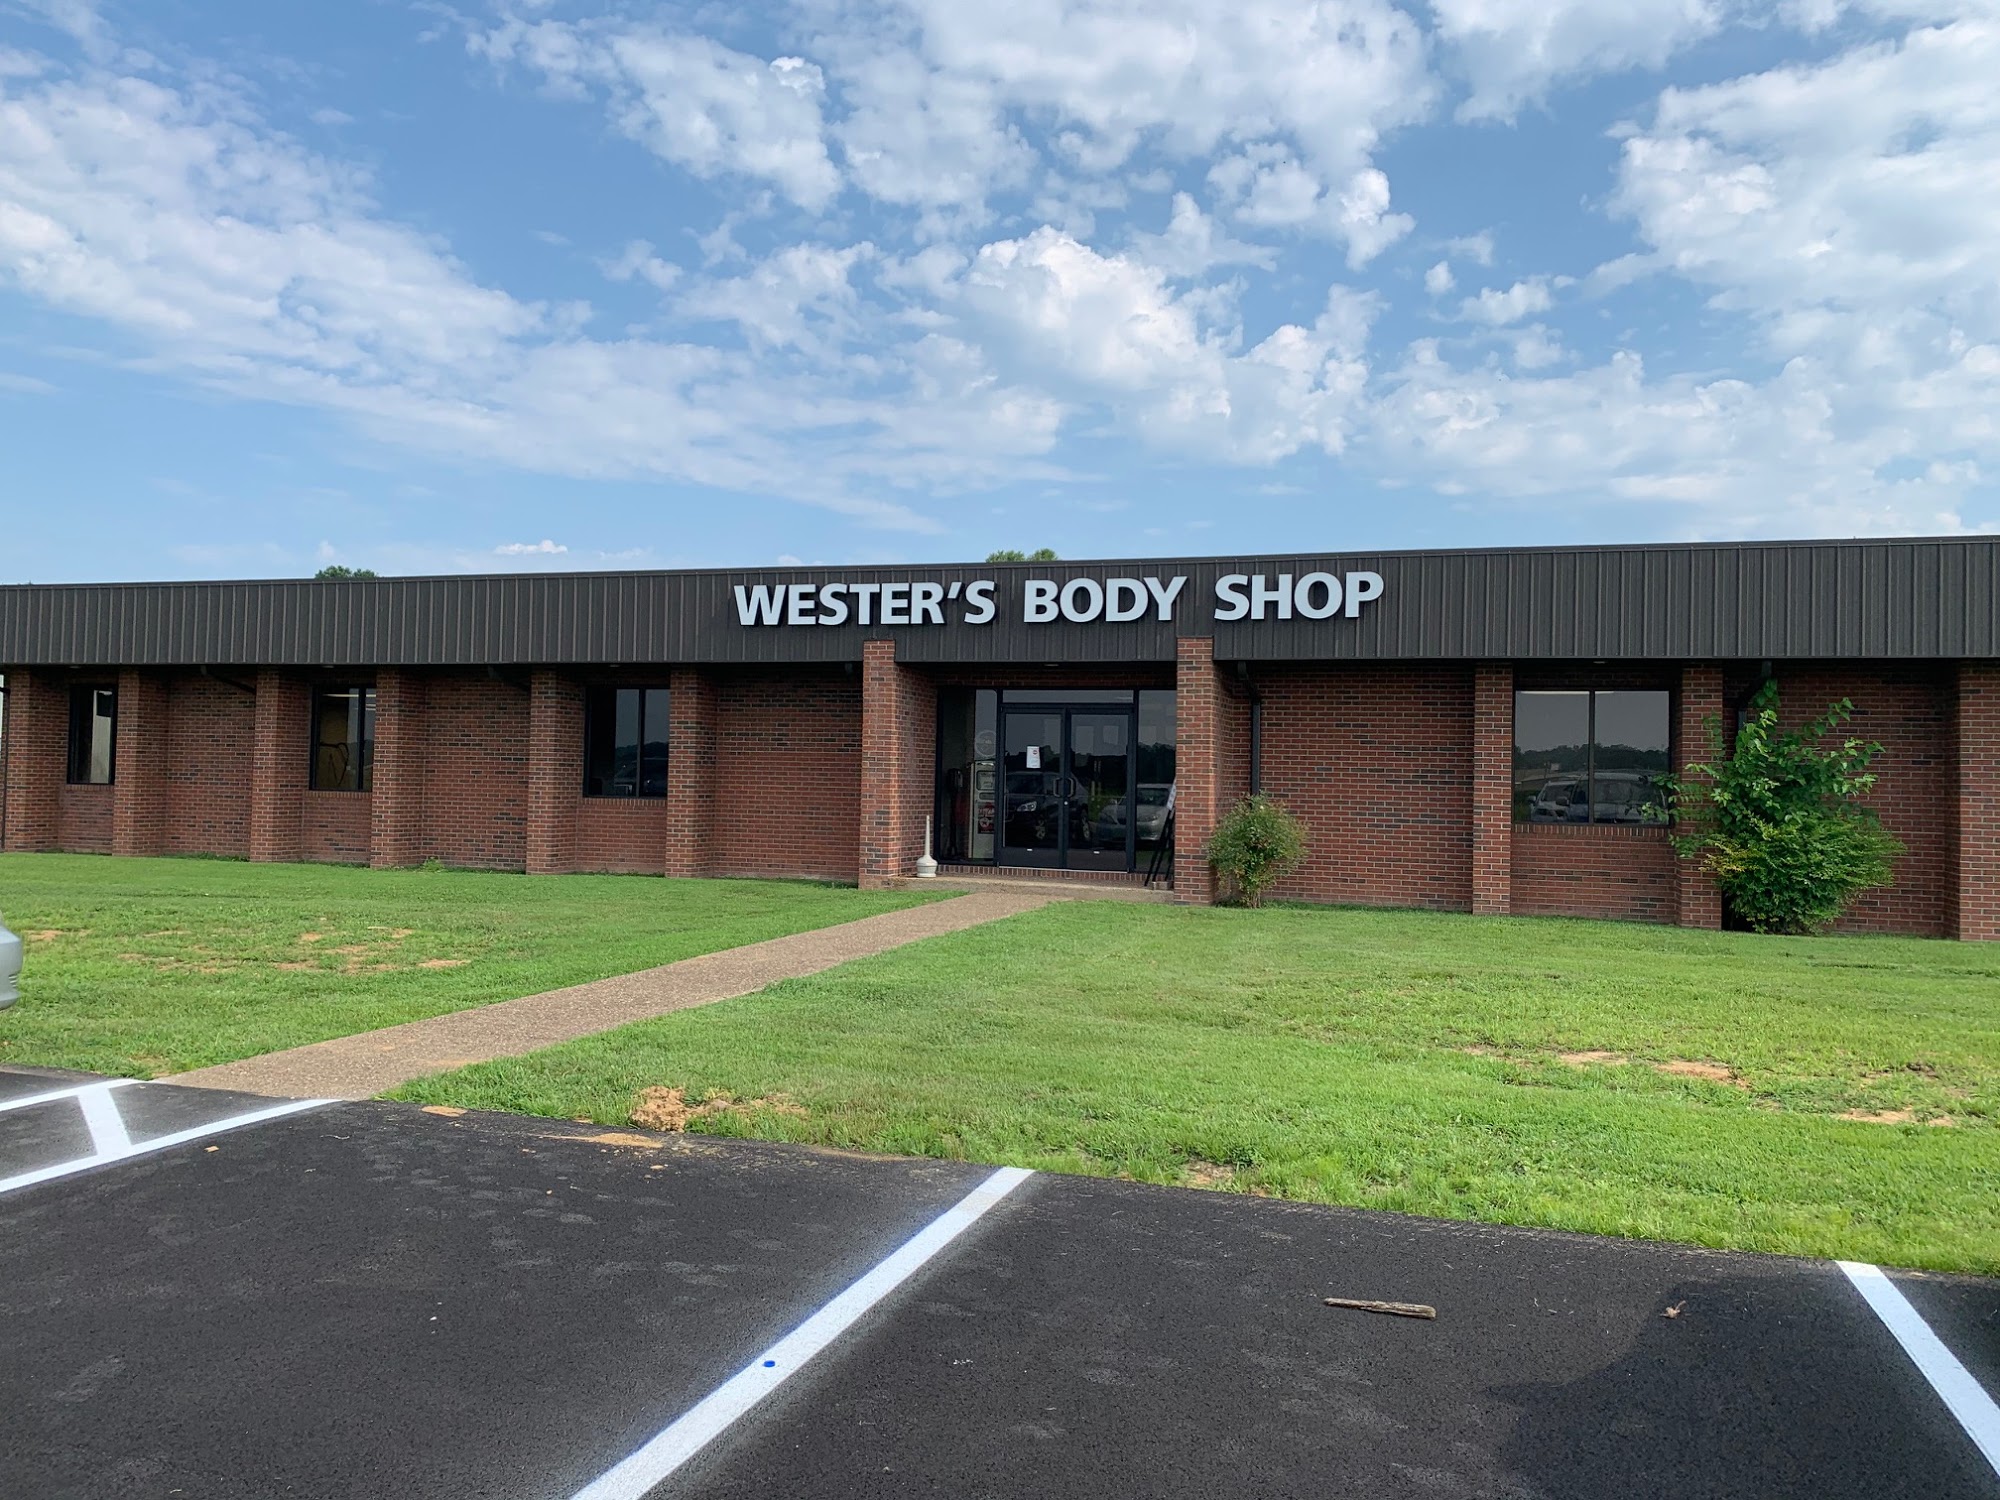 Wester's Body Shop